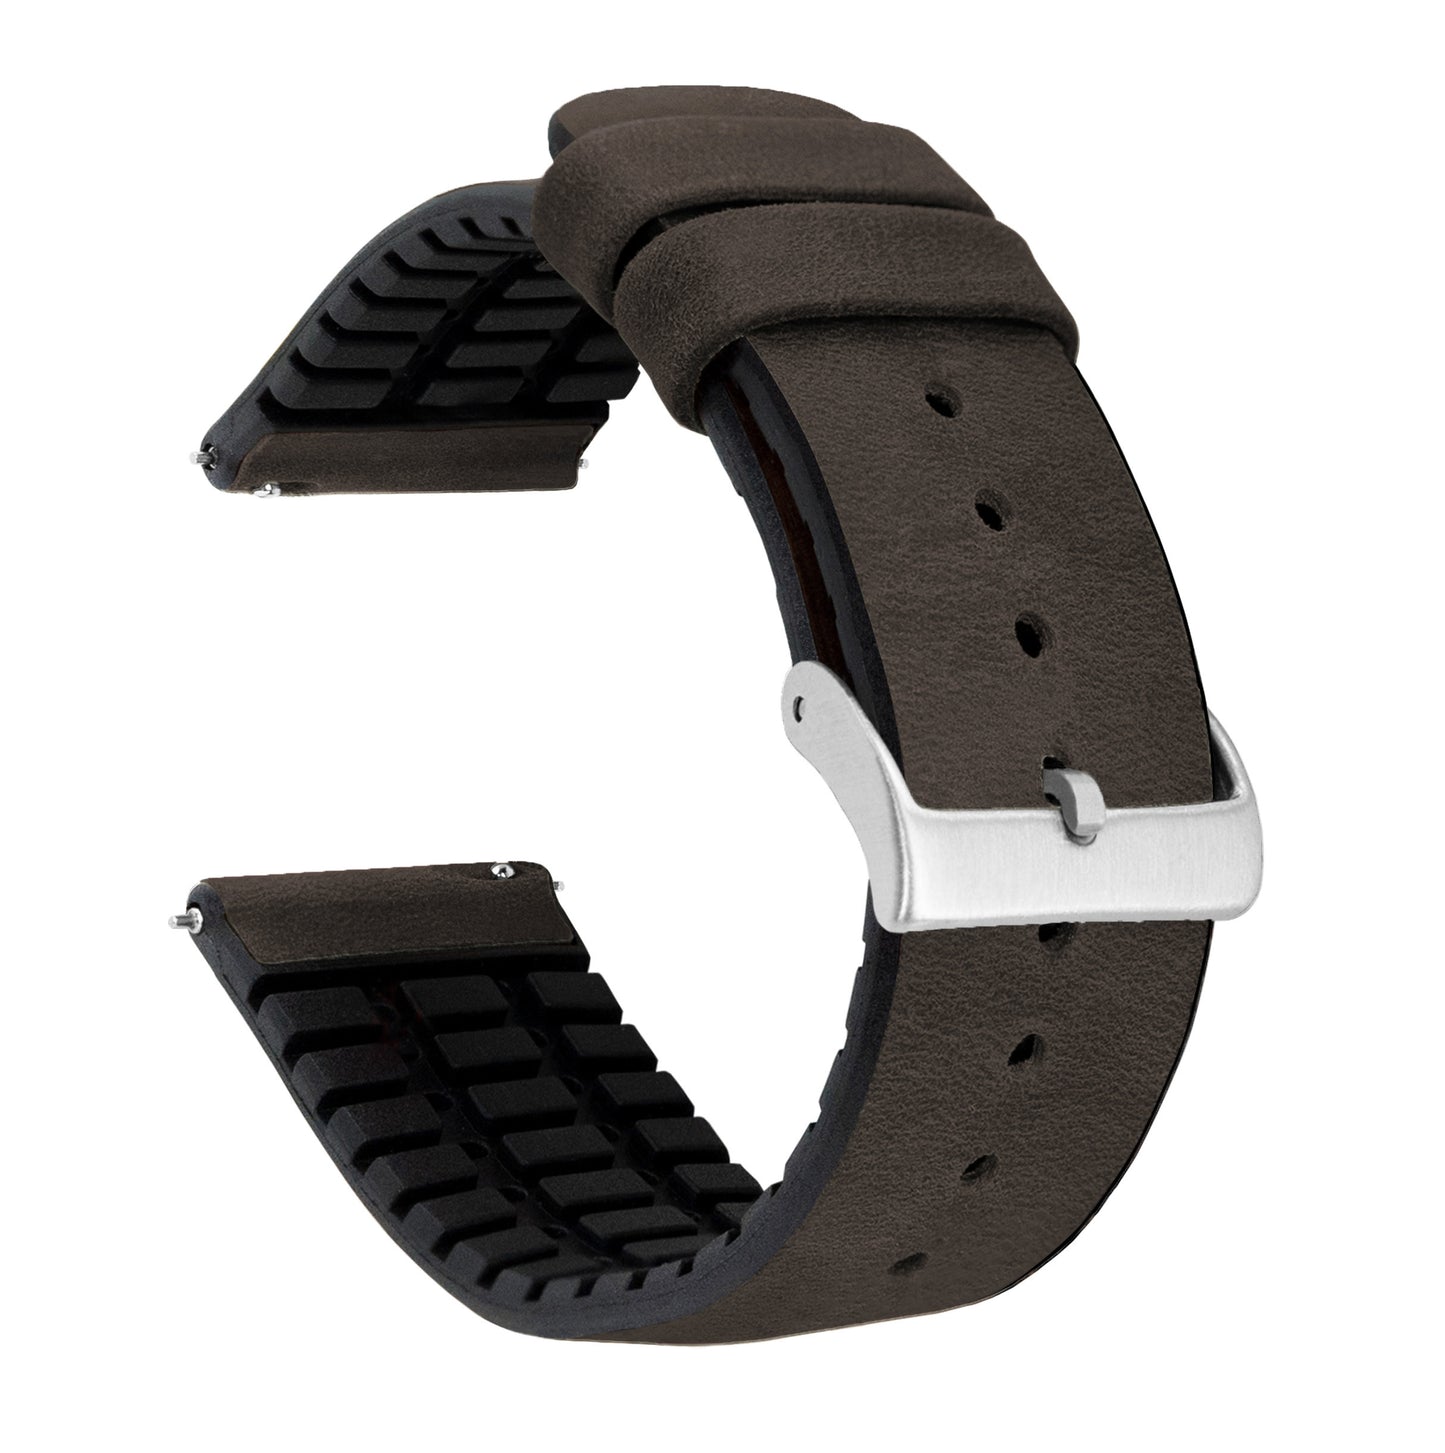 Amazfit Bip | Leather and Rubber Hybrid | Smoke Brown - Barton Watch Bands